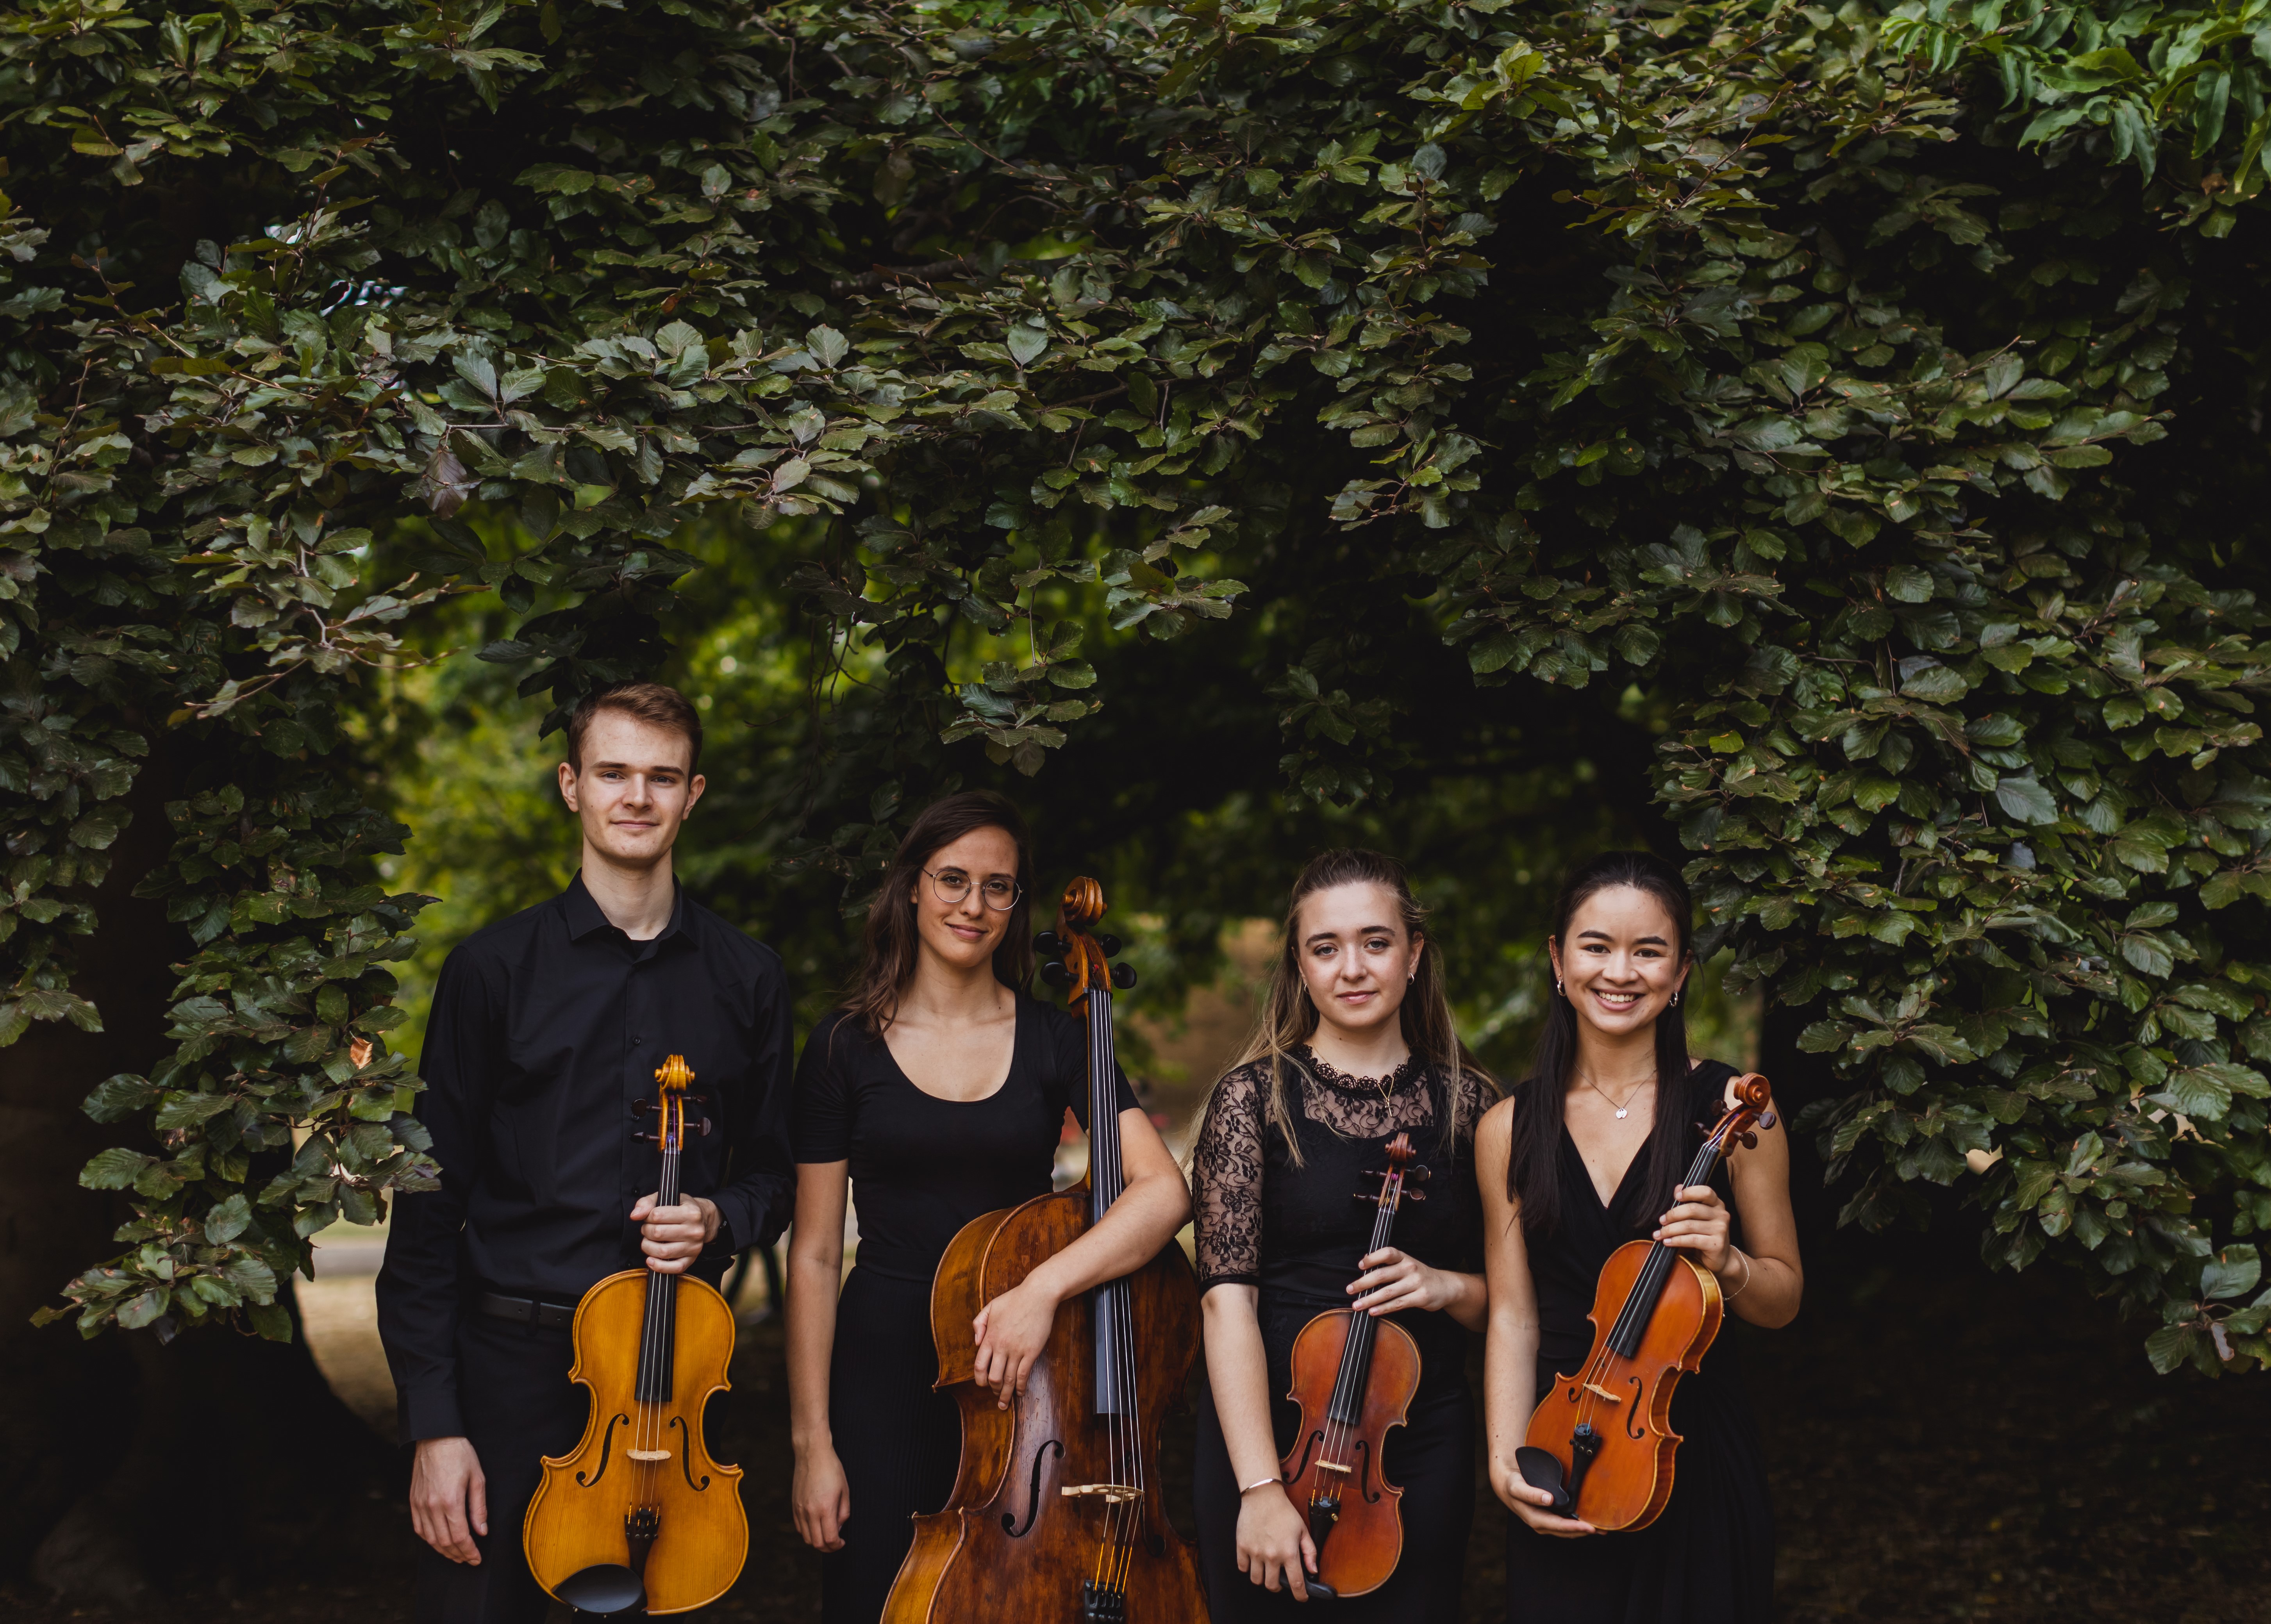 Morassi Quartet sitting on a bench and holding their string instruments smiling with bushes and greenery behind them